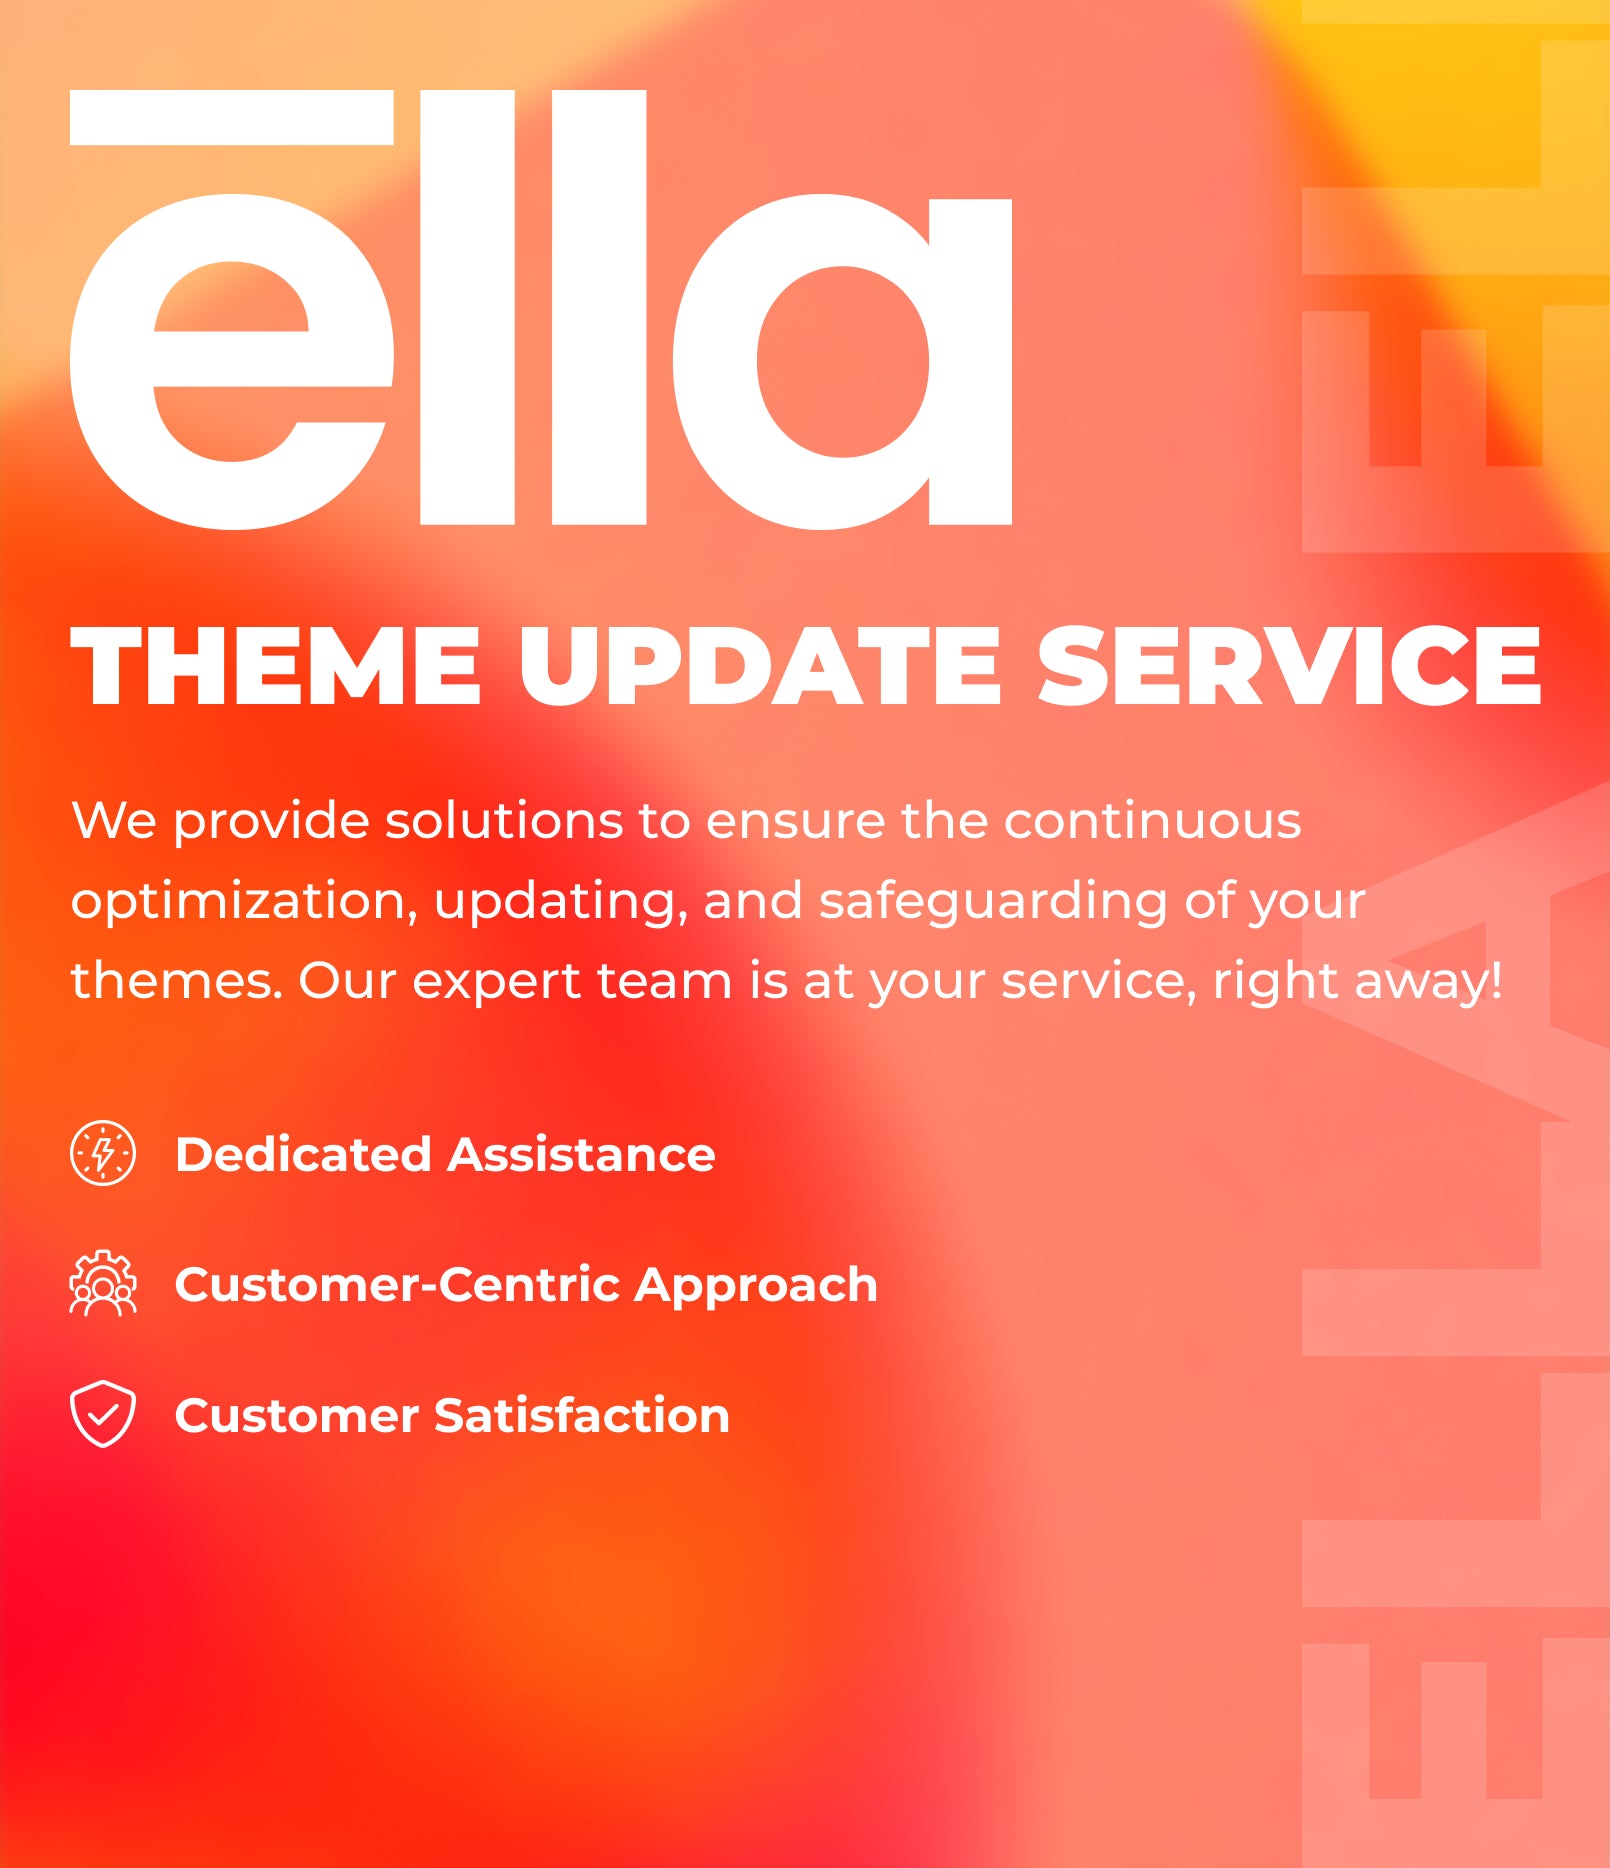 Ella Theme Update Service - Stay Current with the Latest Features and Security